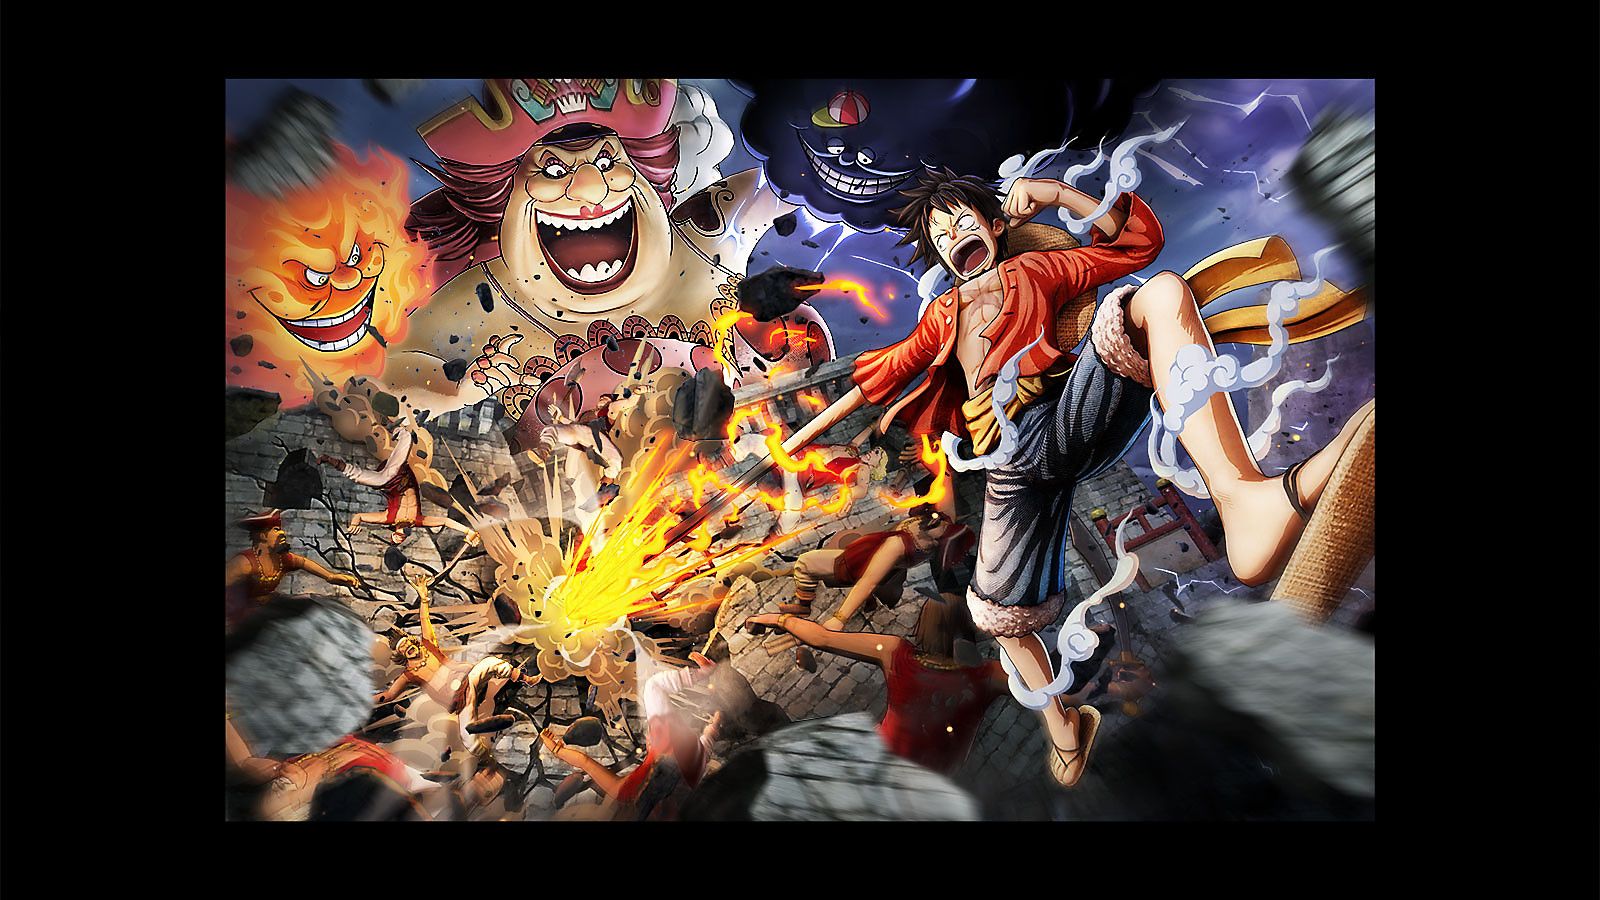 ONE PIECE: PIRATE WARRIORS 4 Game